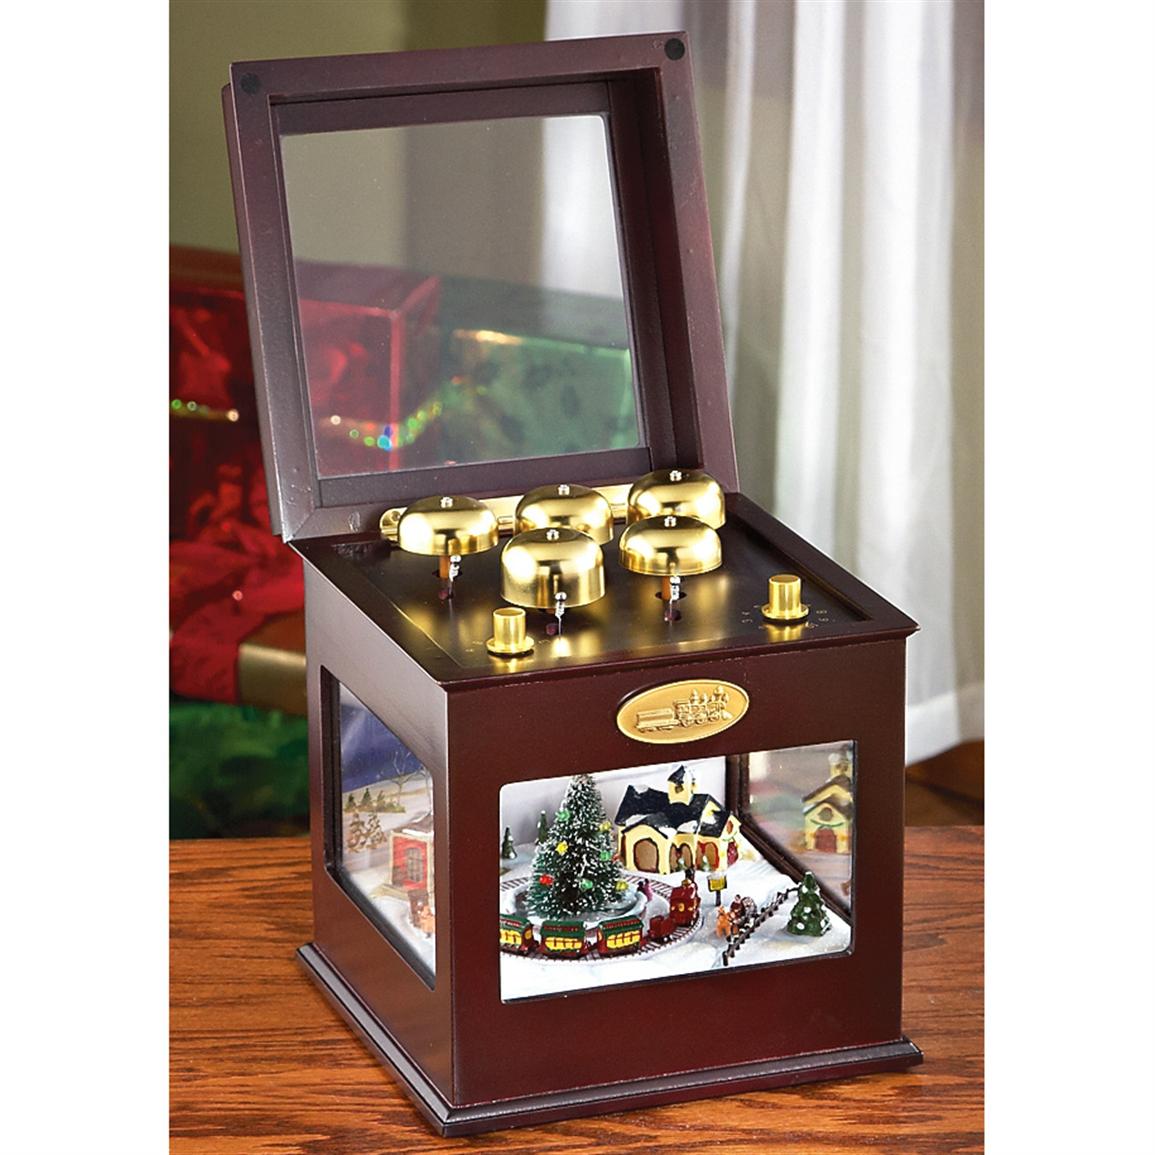 Mr. Christmas® Animated Symphony of Bells - 215646, Seasonal Gifts at Sportsman's Guide